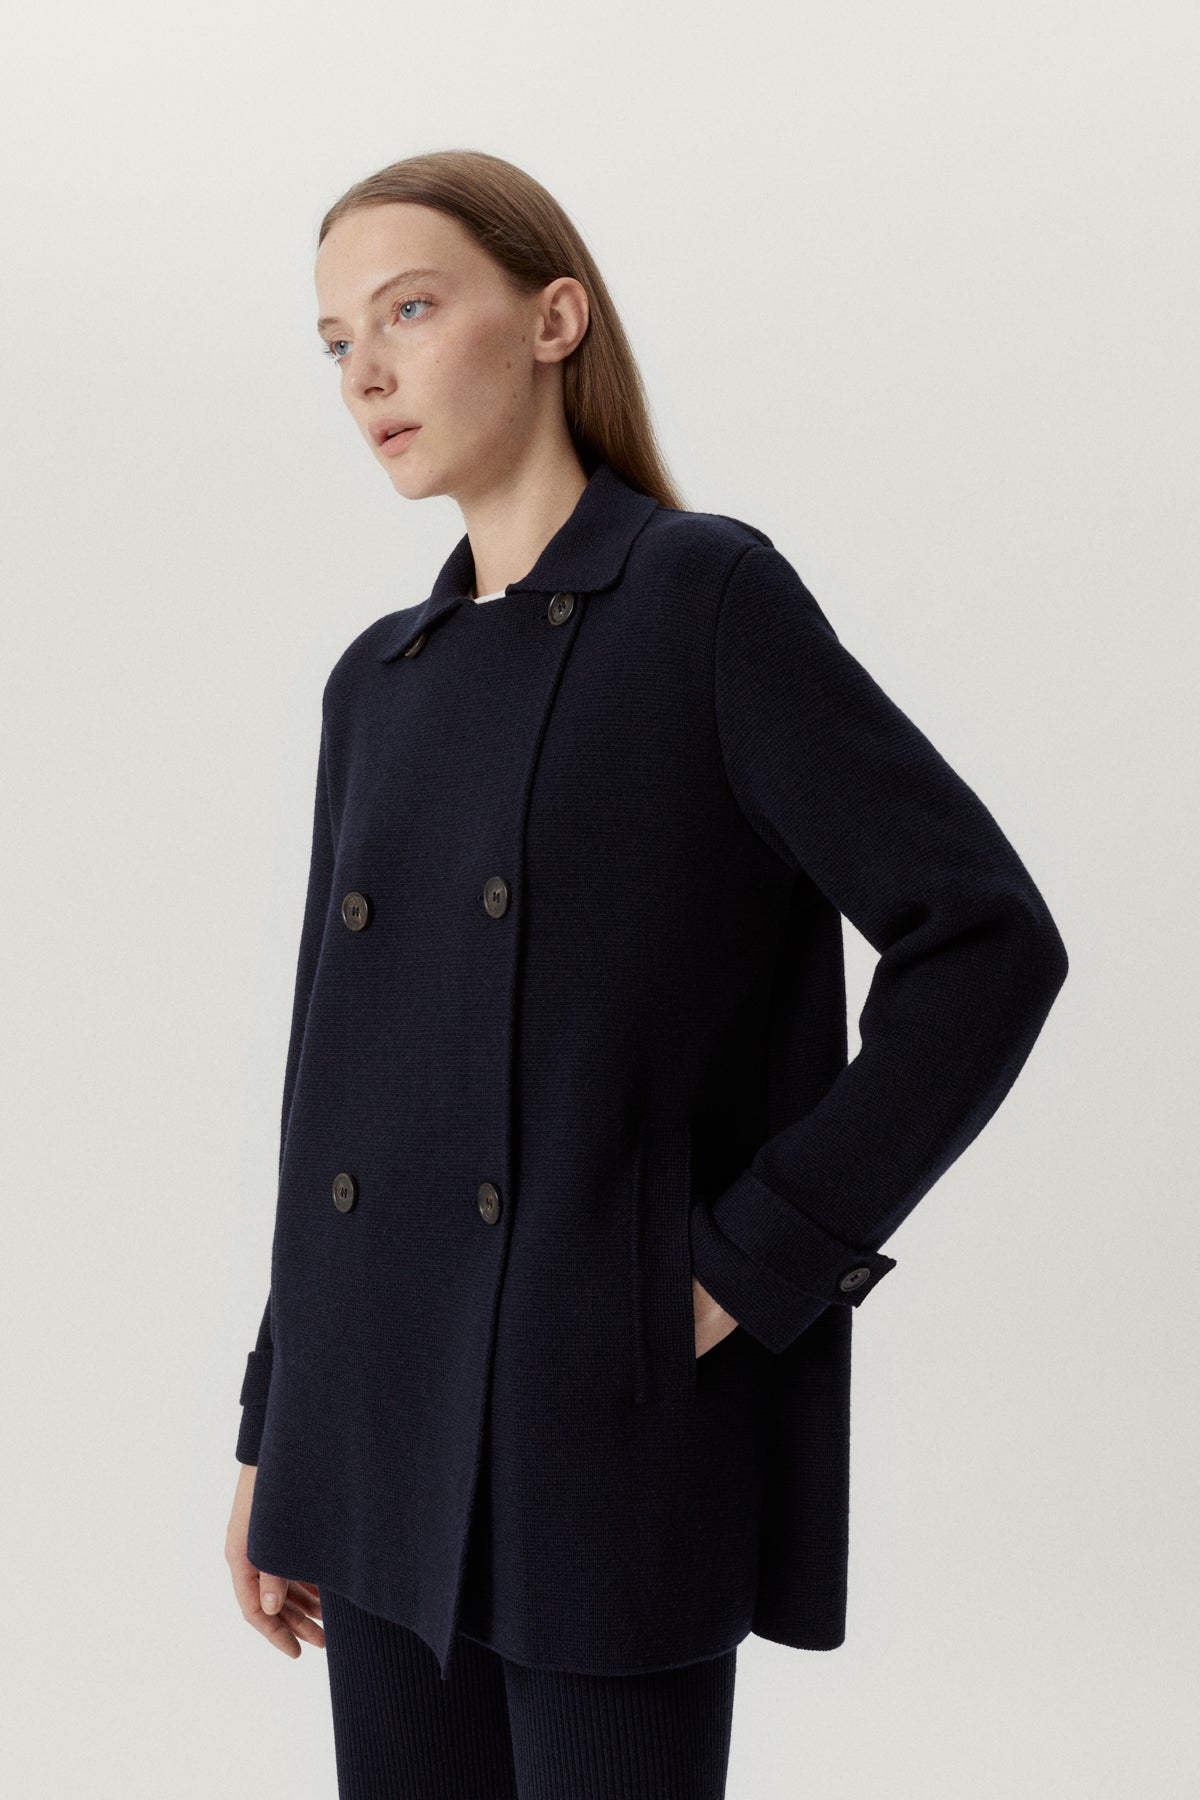 the merino wool double breasted jacket oxford blue